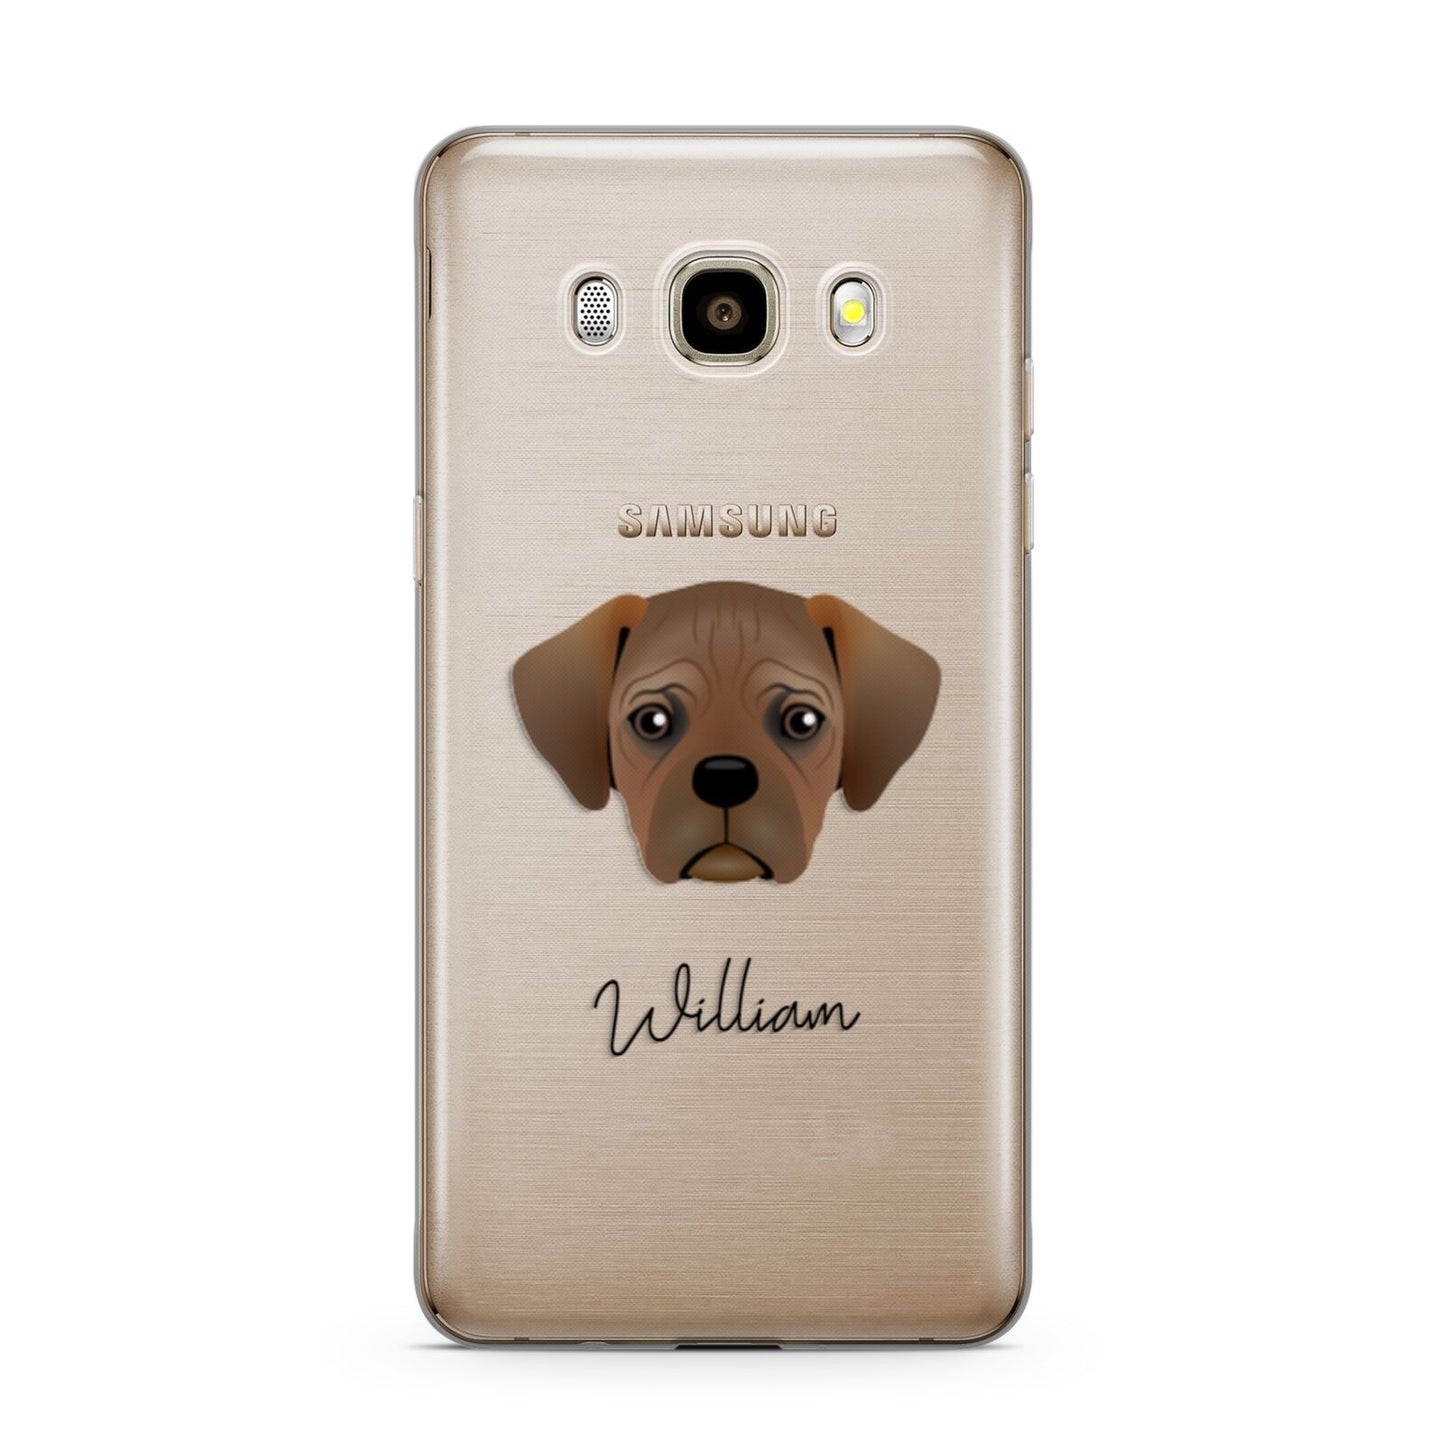 Pugalier Personalised Samsung Galaxy J7 2016 Case on gold phone